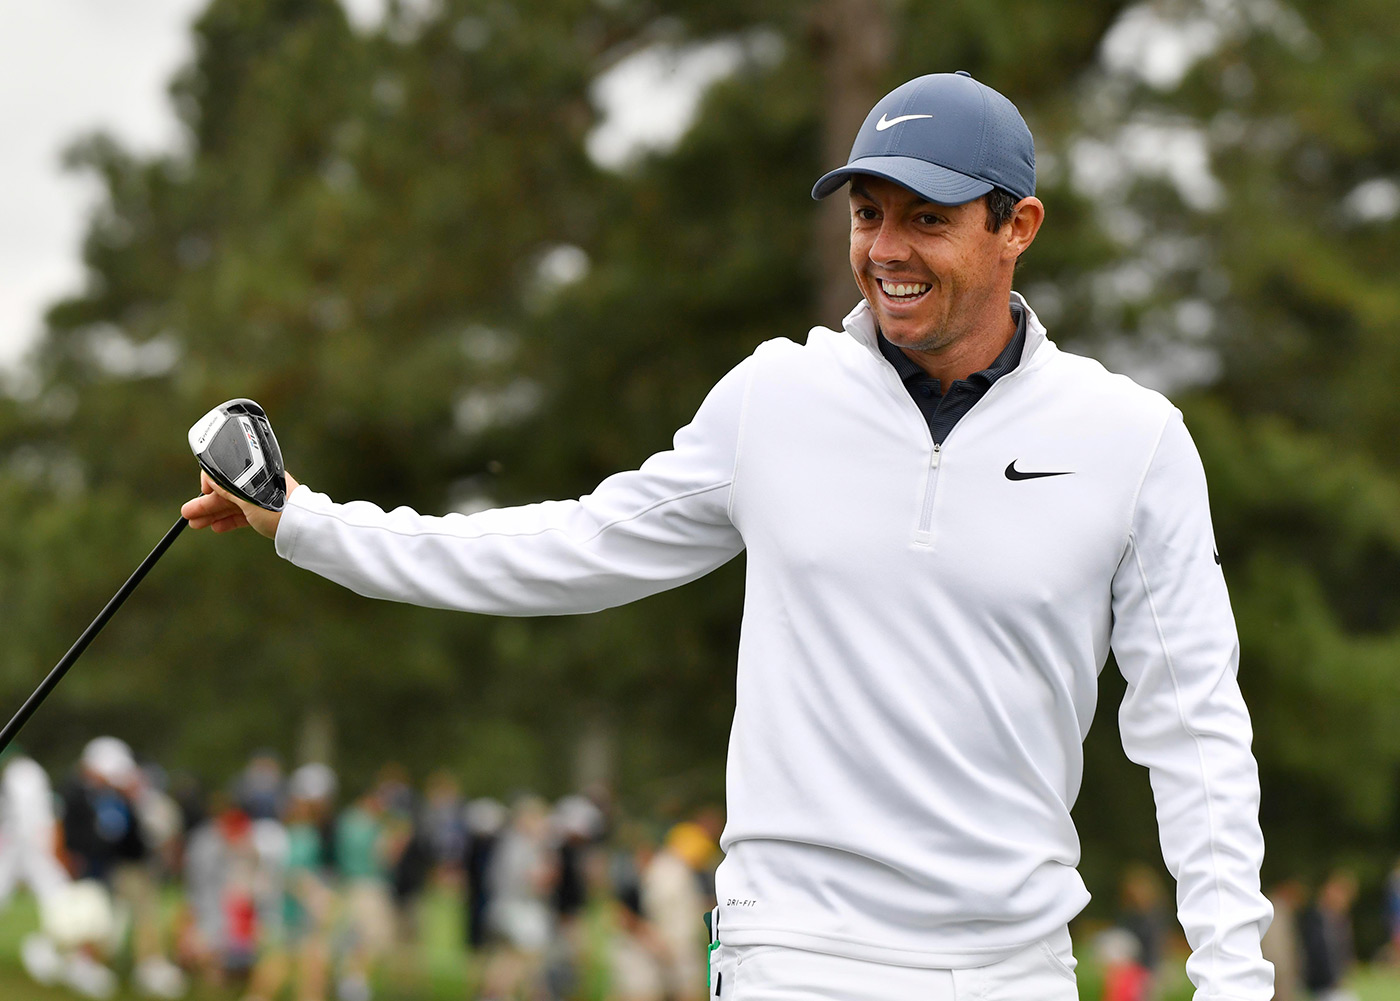 Rory McIlroy at the 2018 Masters.